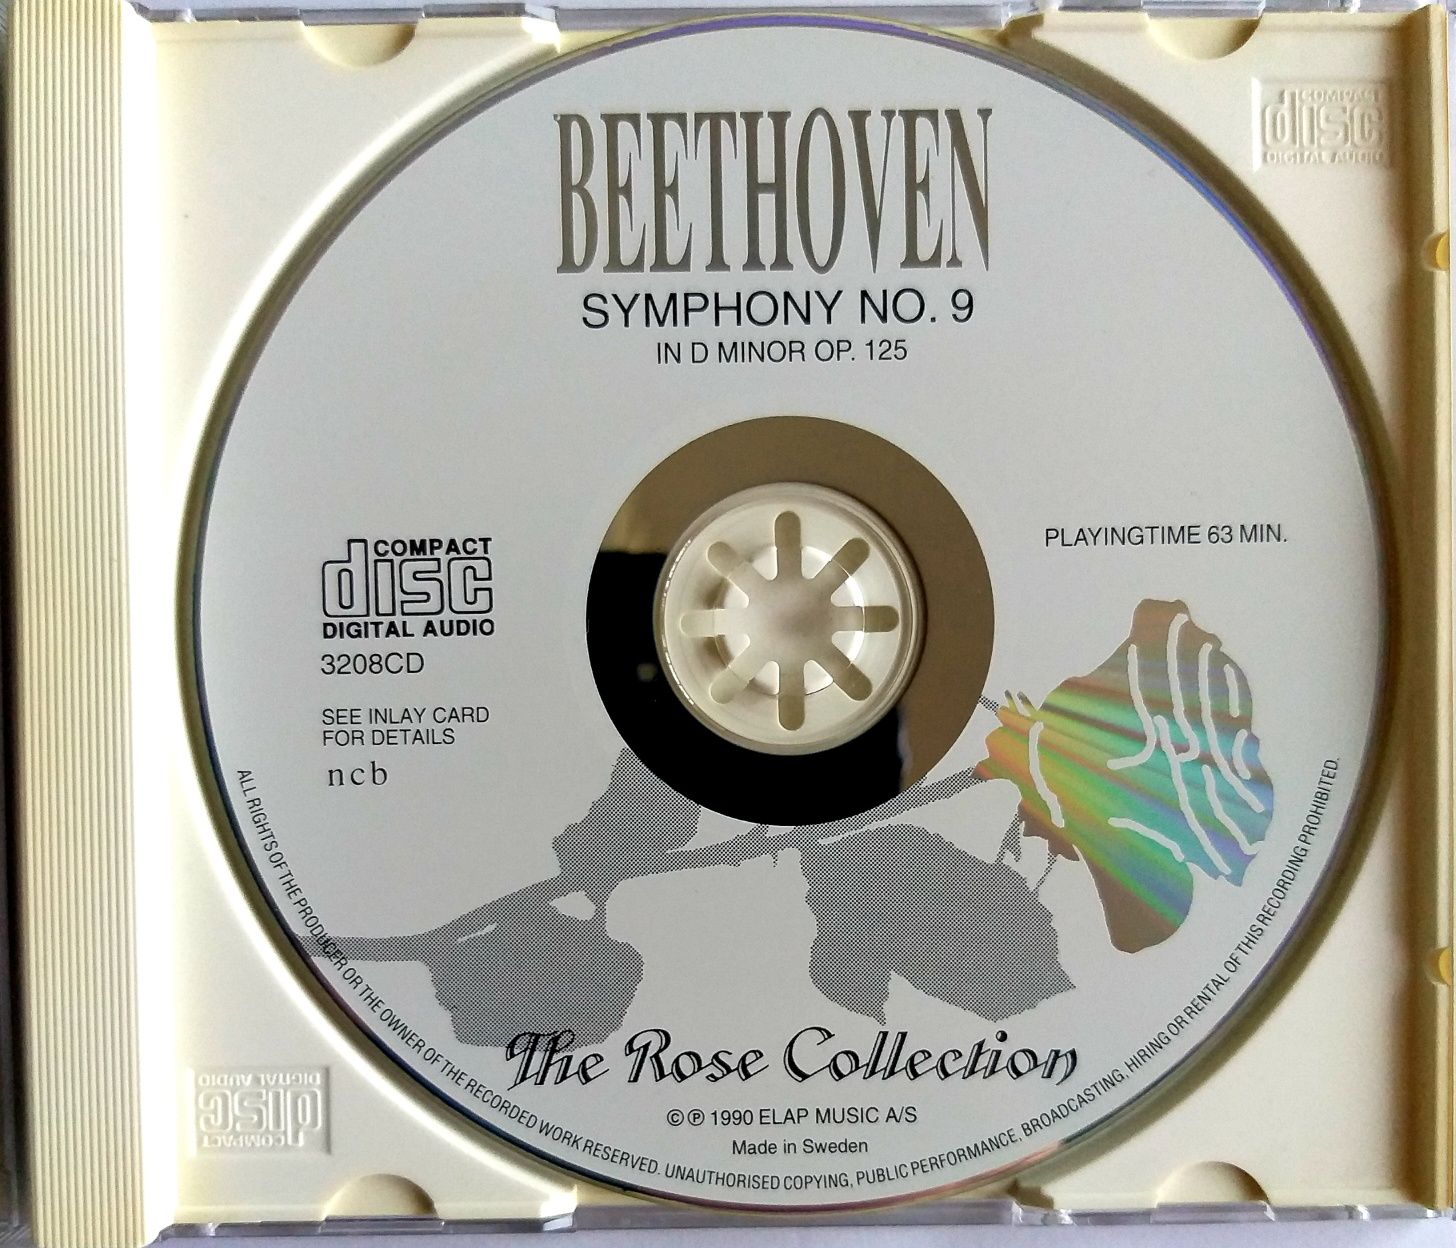 Beethoven Symhony no. 9 The Rose Collection 1990r